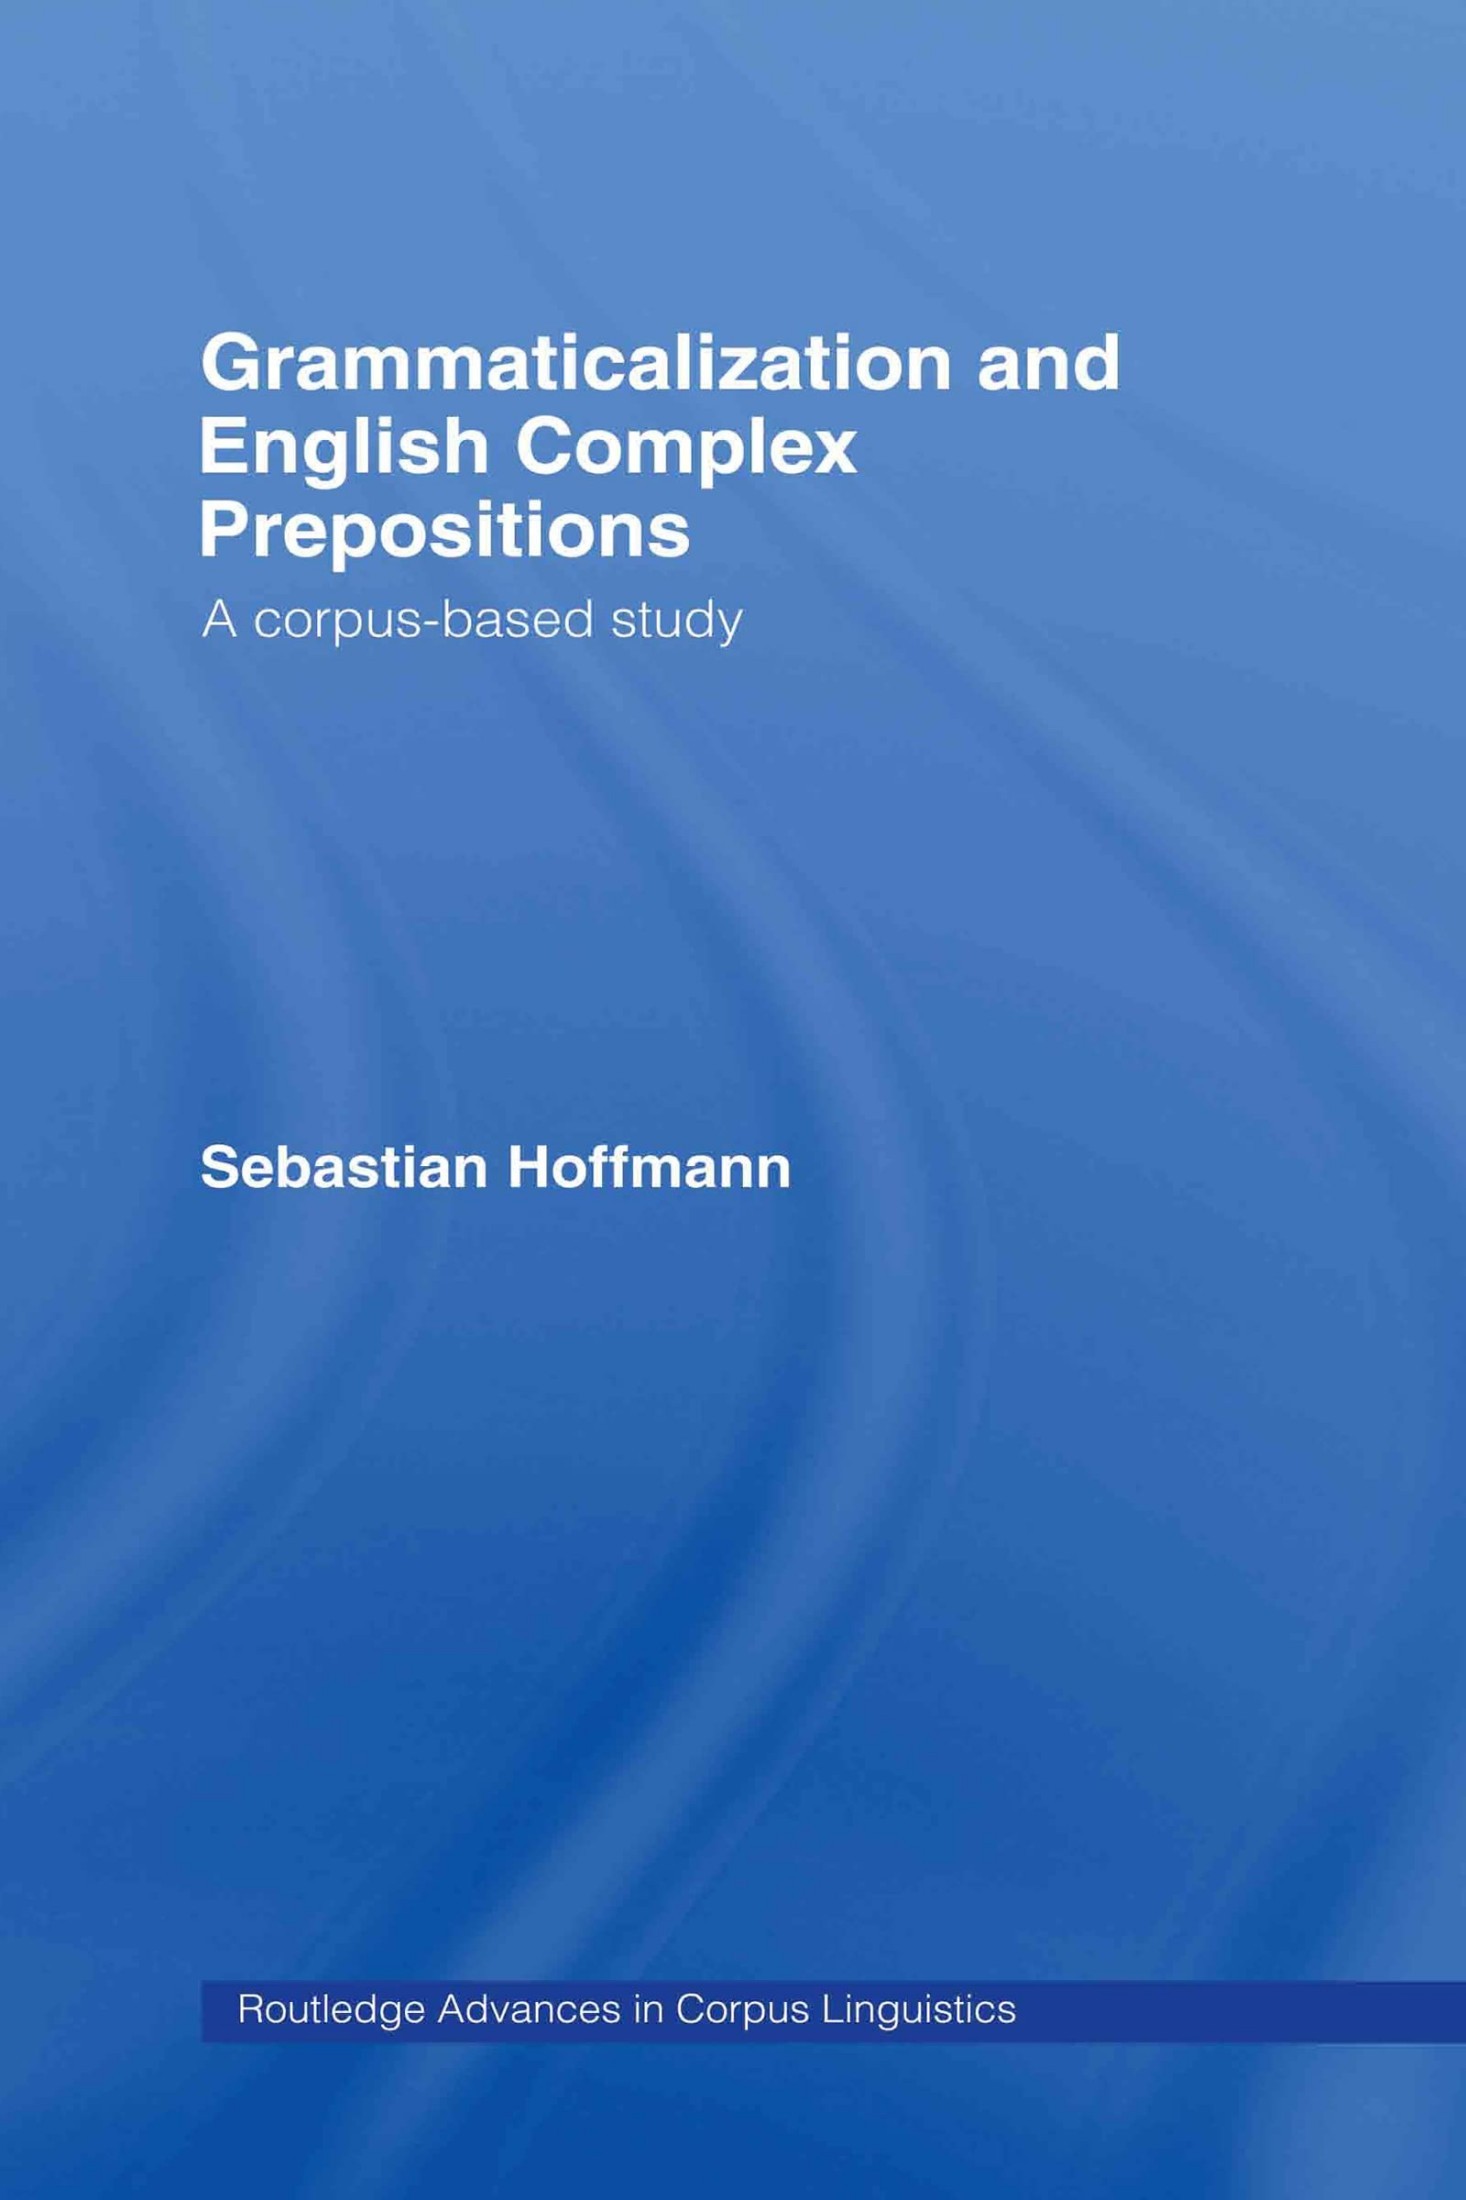 Grammaticalization and English Complex Prepositions: A Corpus-Based Study